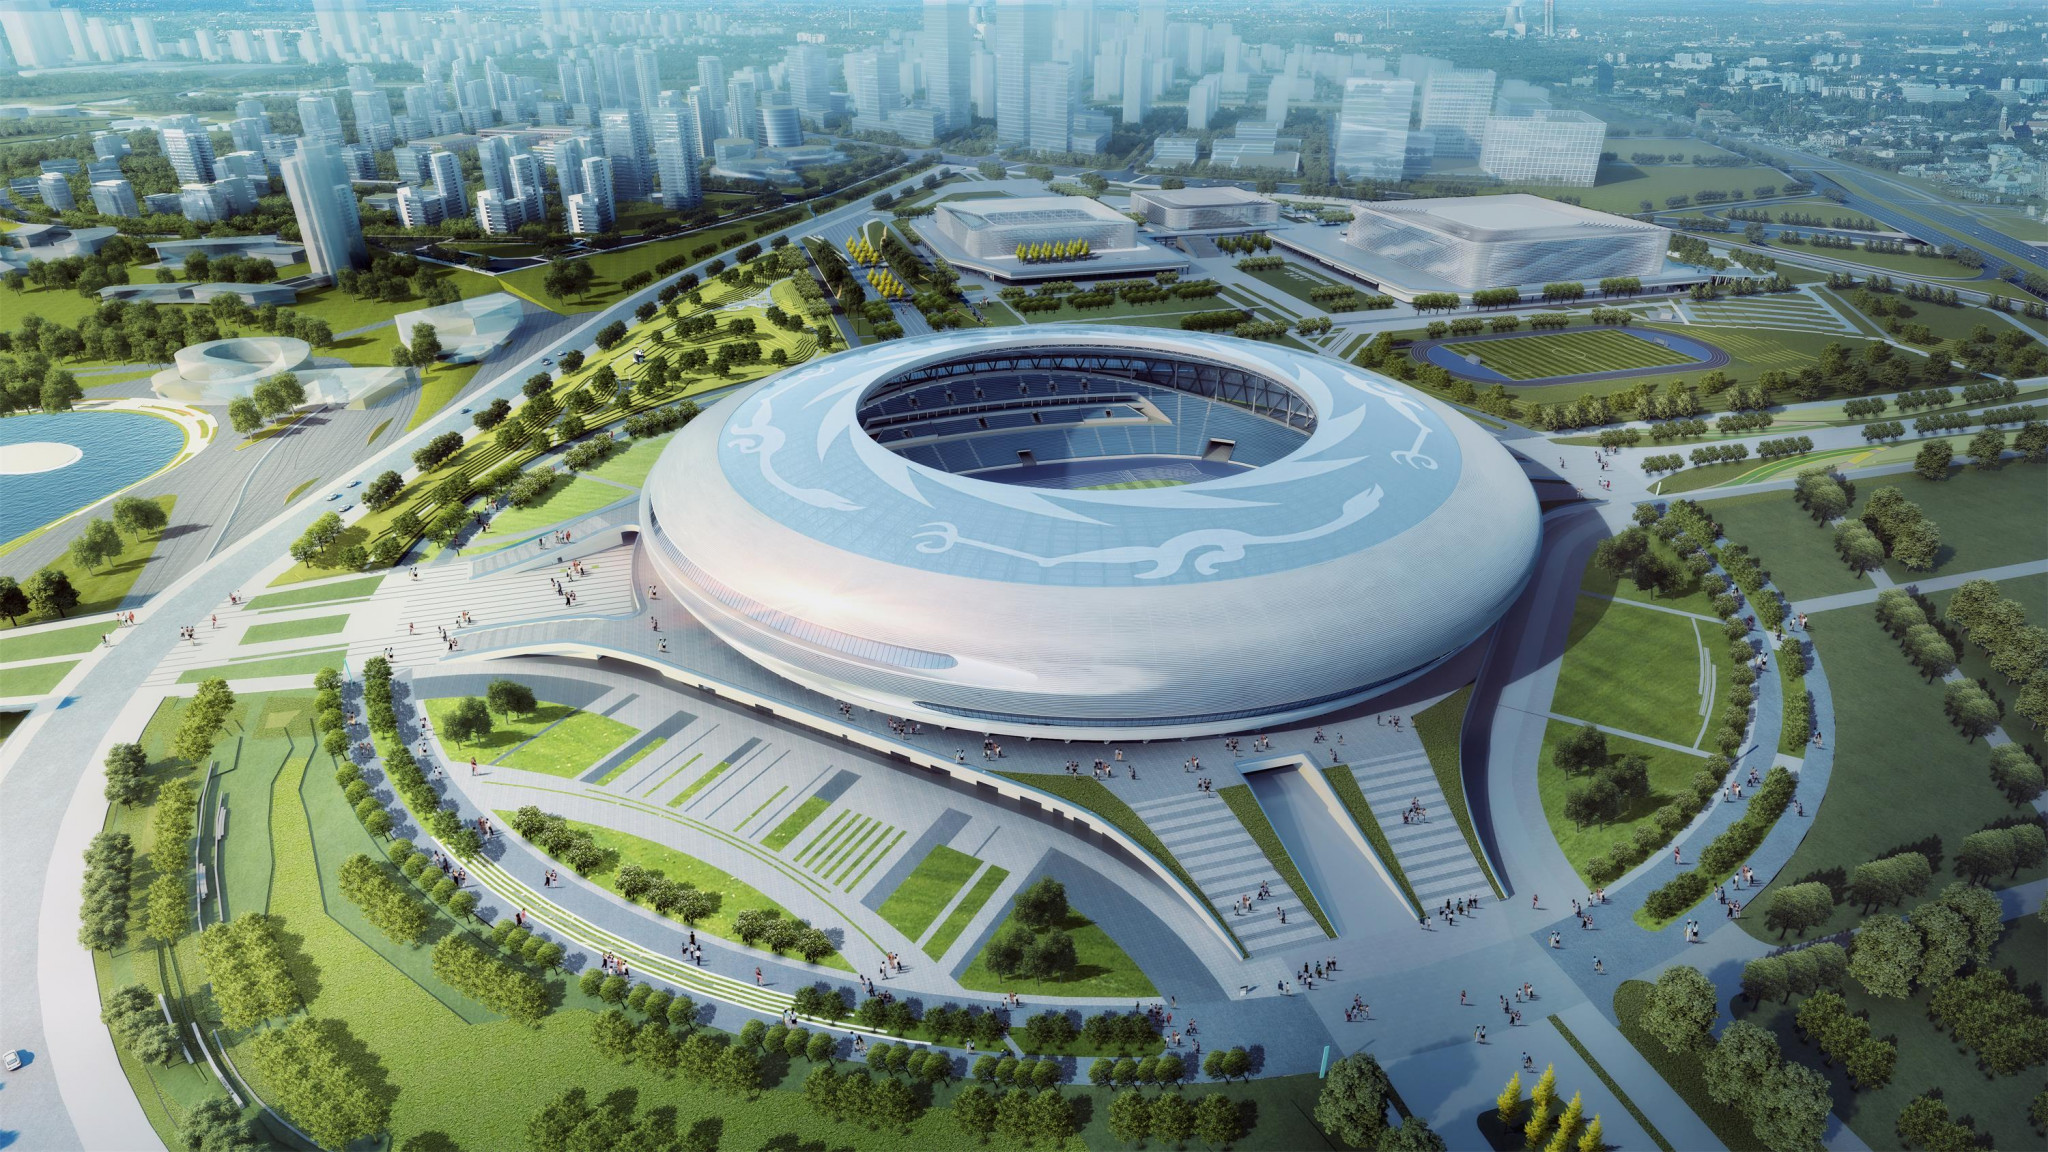 Dong'an Lake Sports Park will host the Opening Ceremony for Chengdu 2021 ©Chengdu 2021